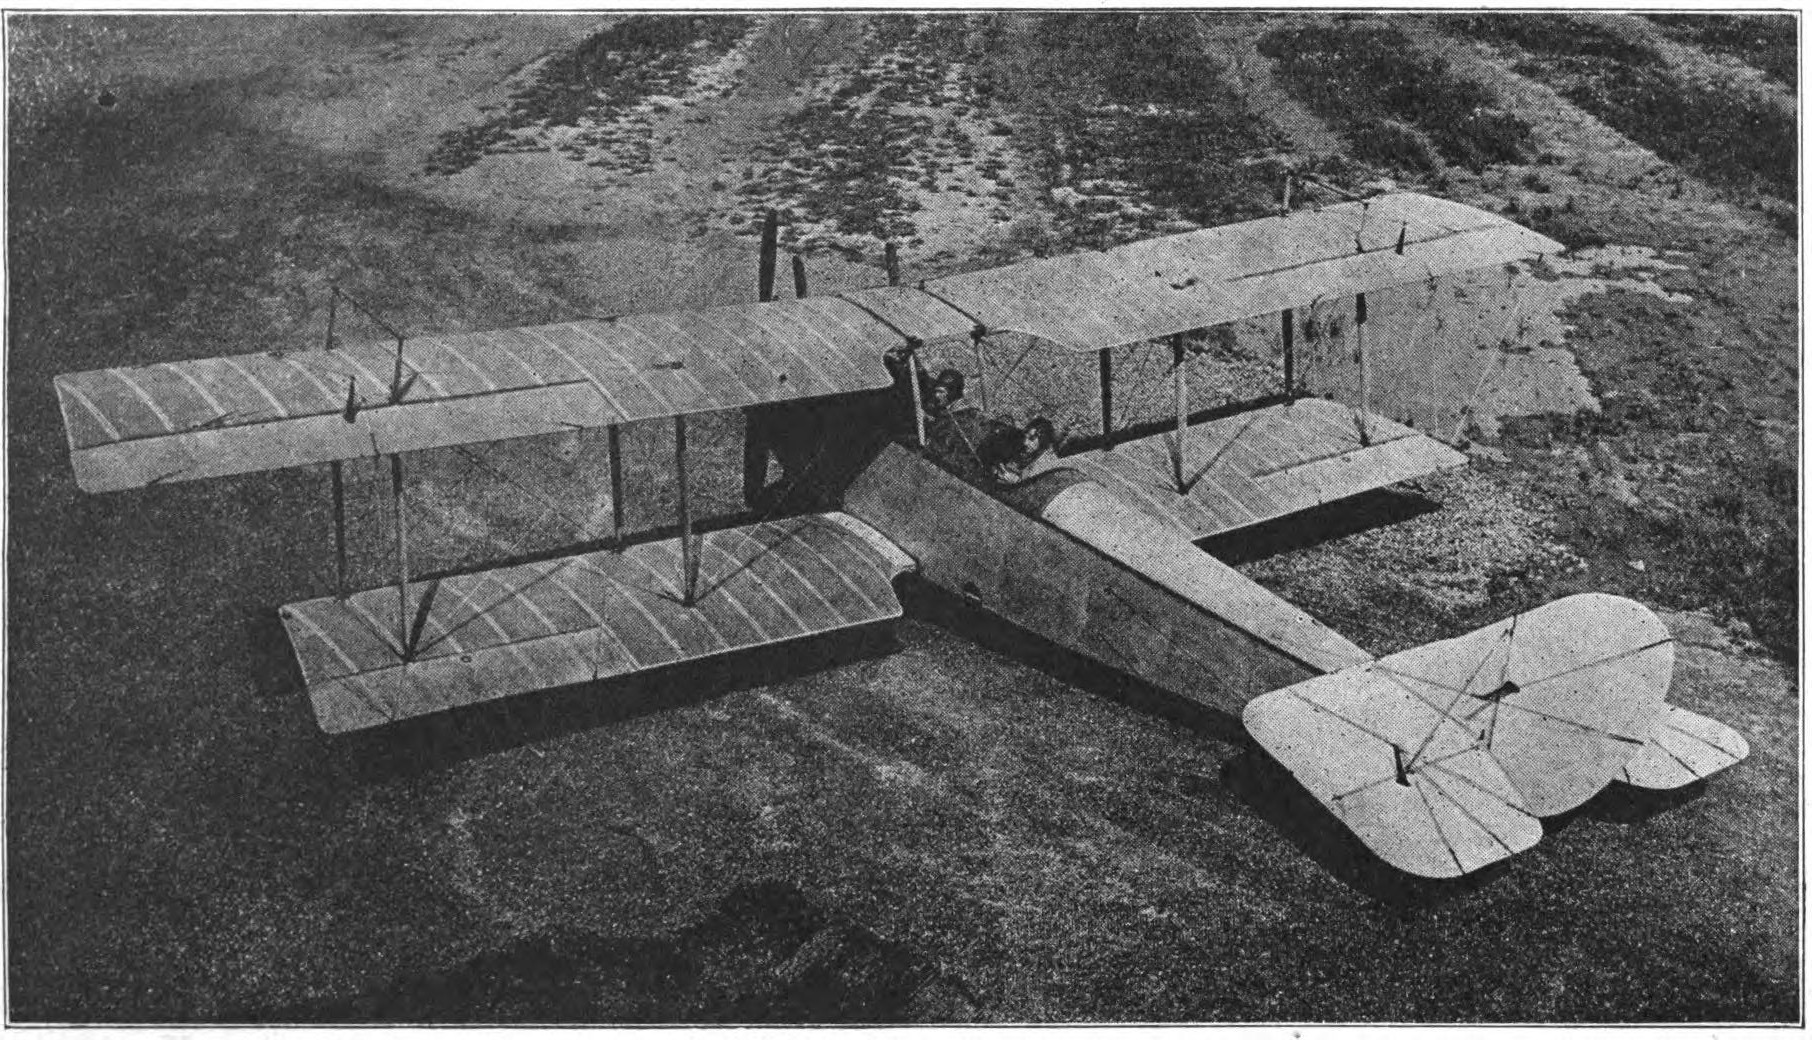 Curtiss Type JN4D Biplane Used by The United States Air Mail Service